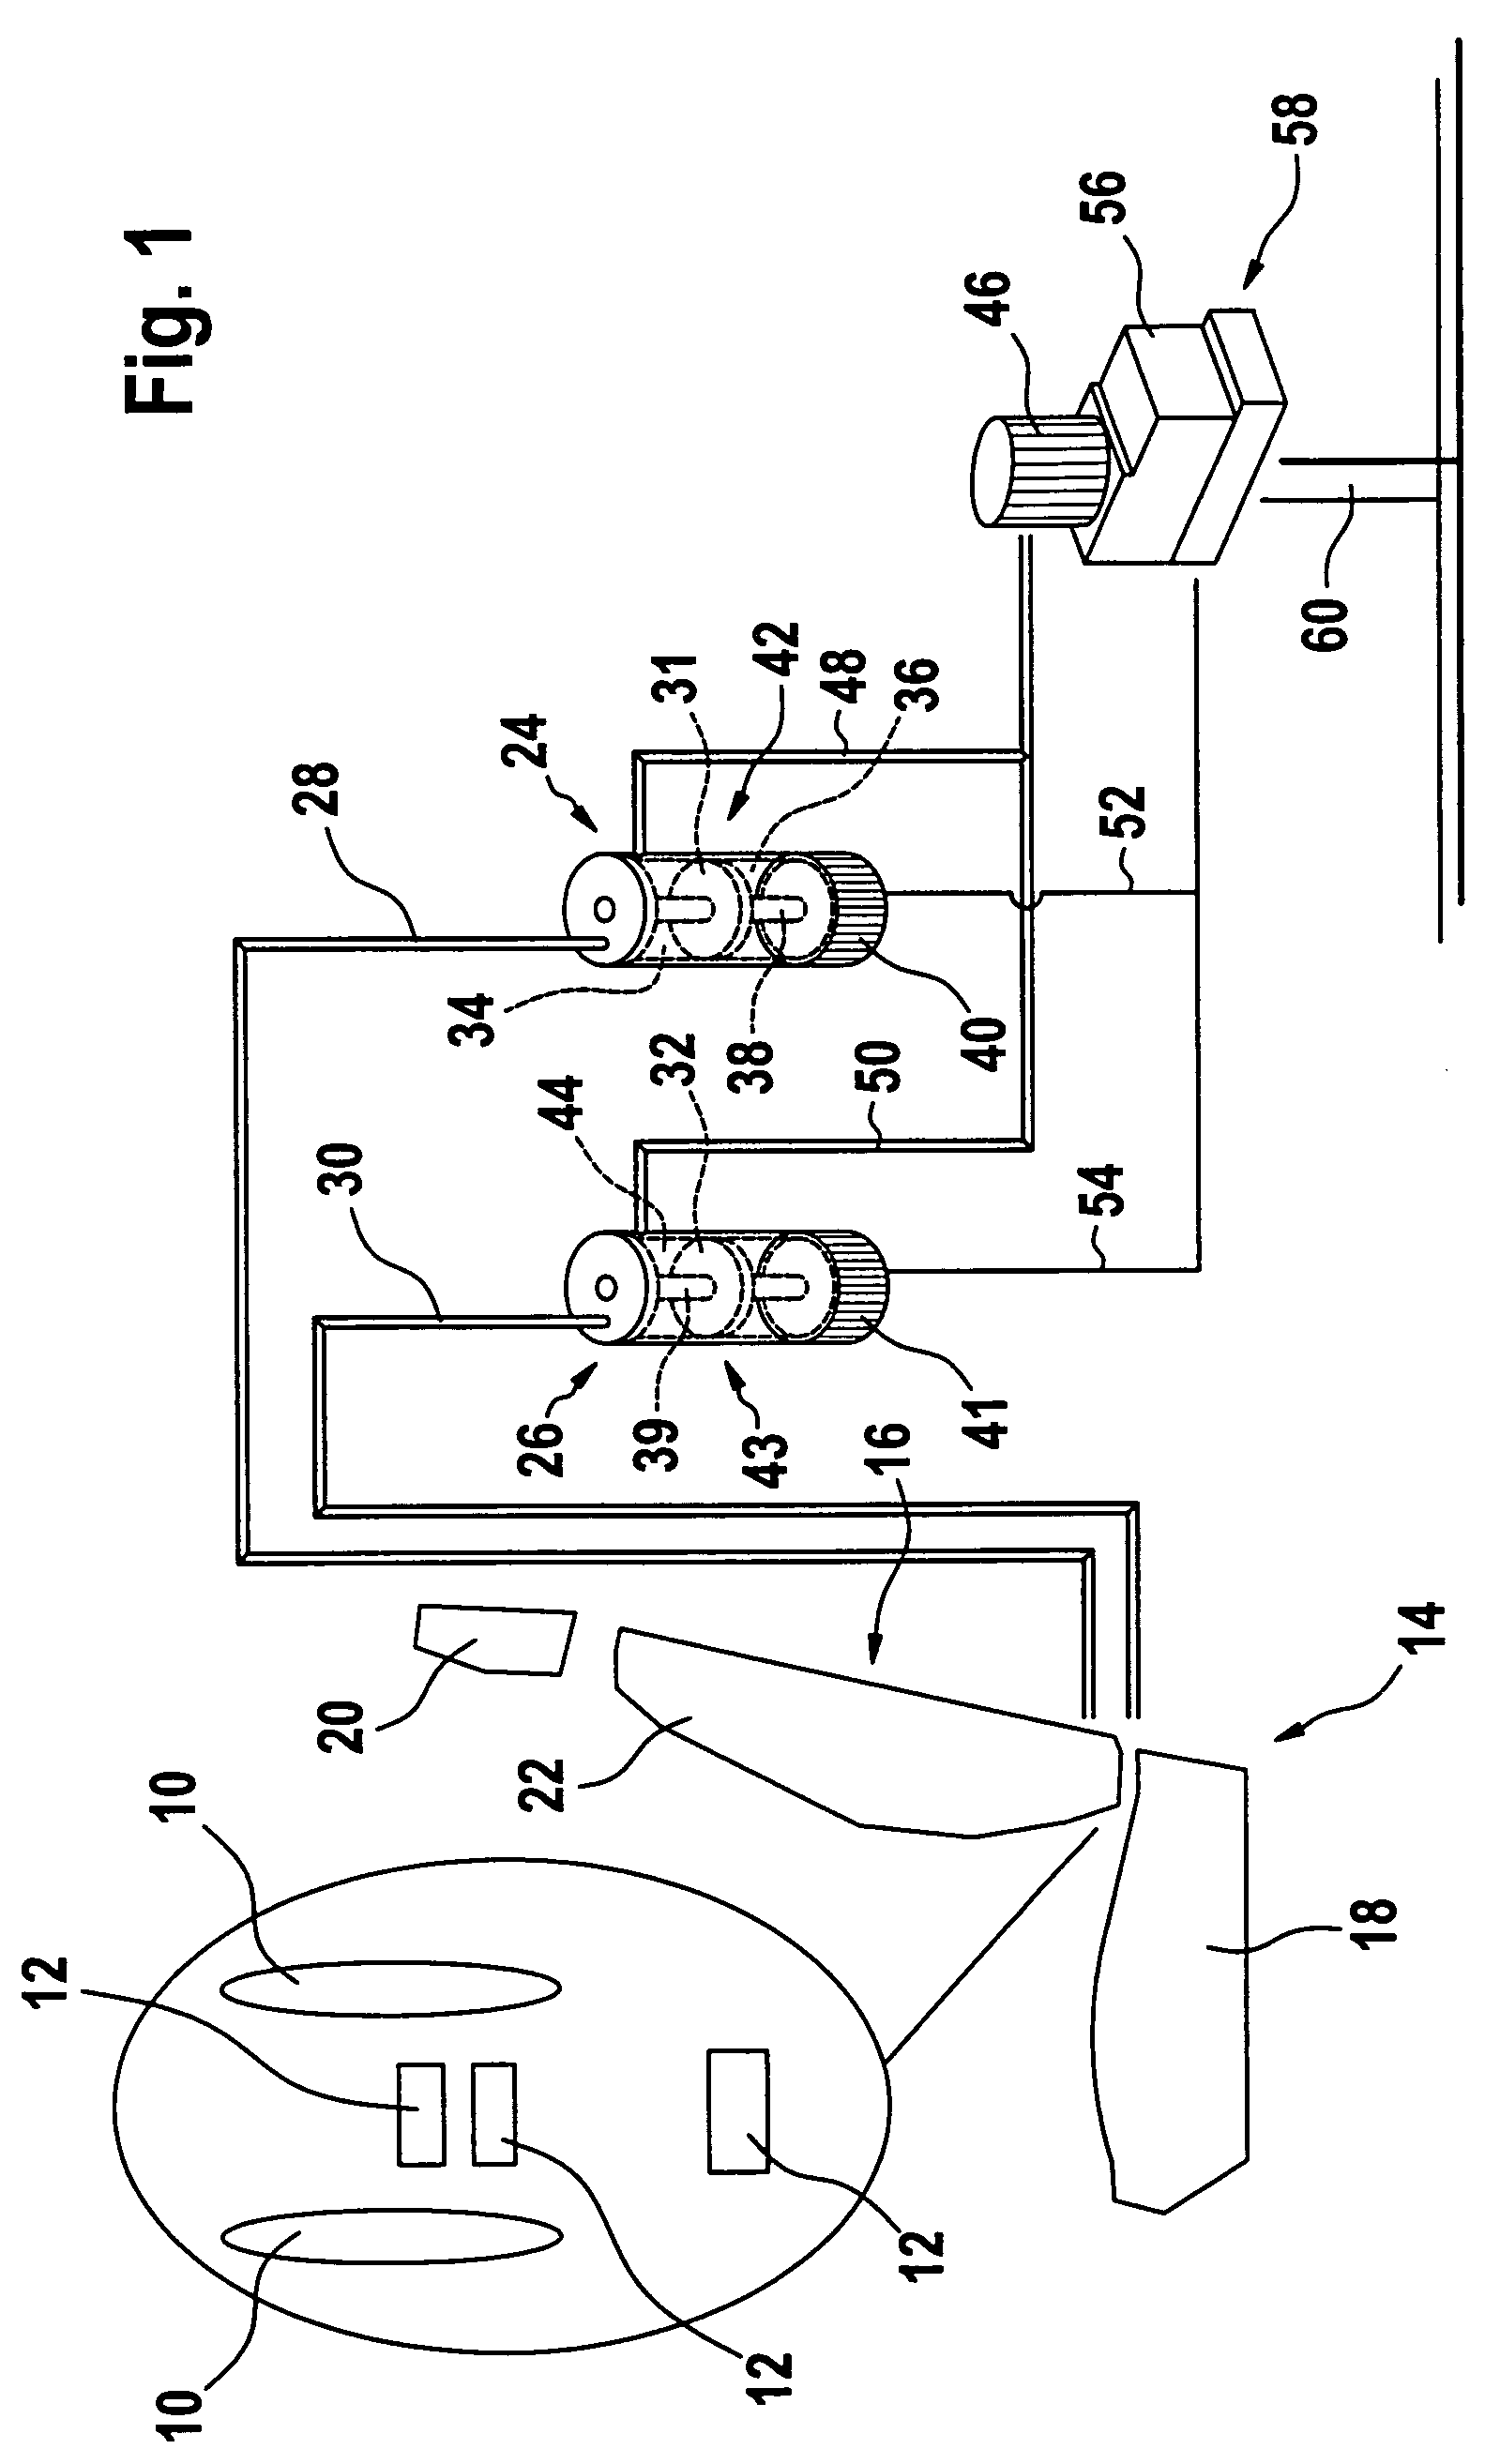 Device and method to control and/or regulate a pressure level